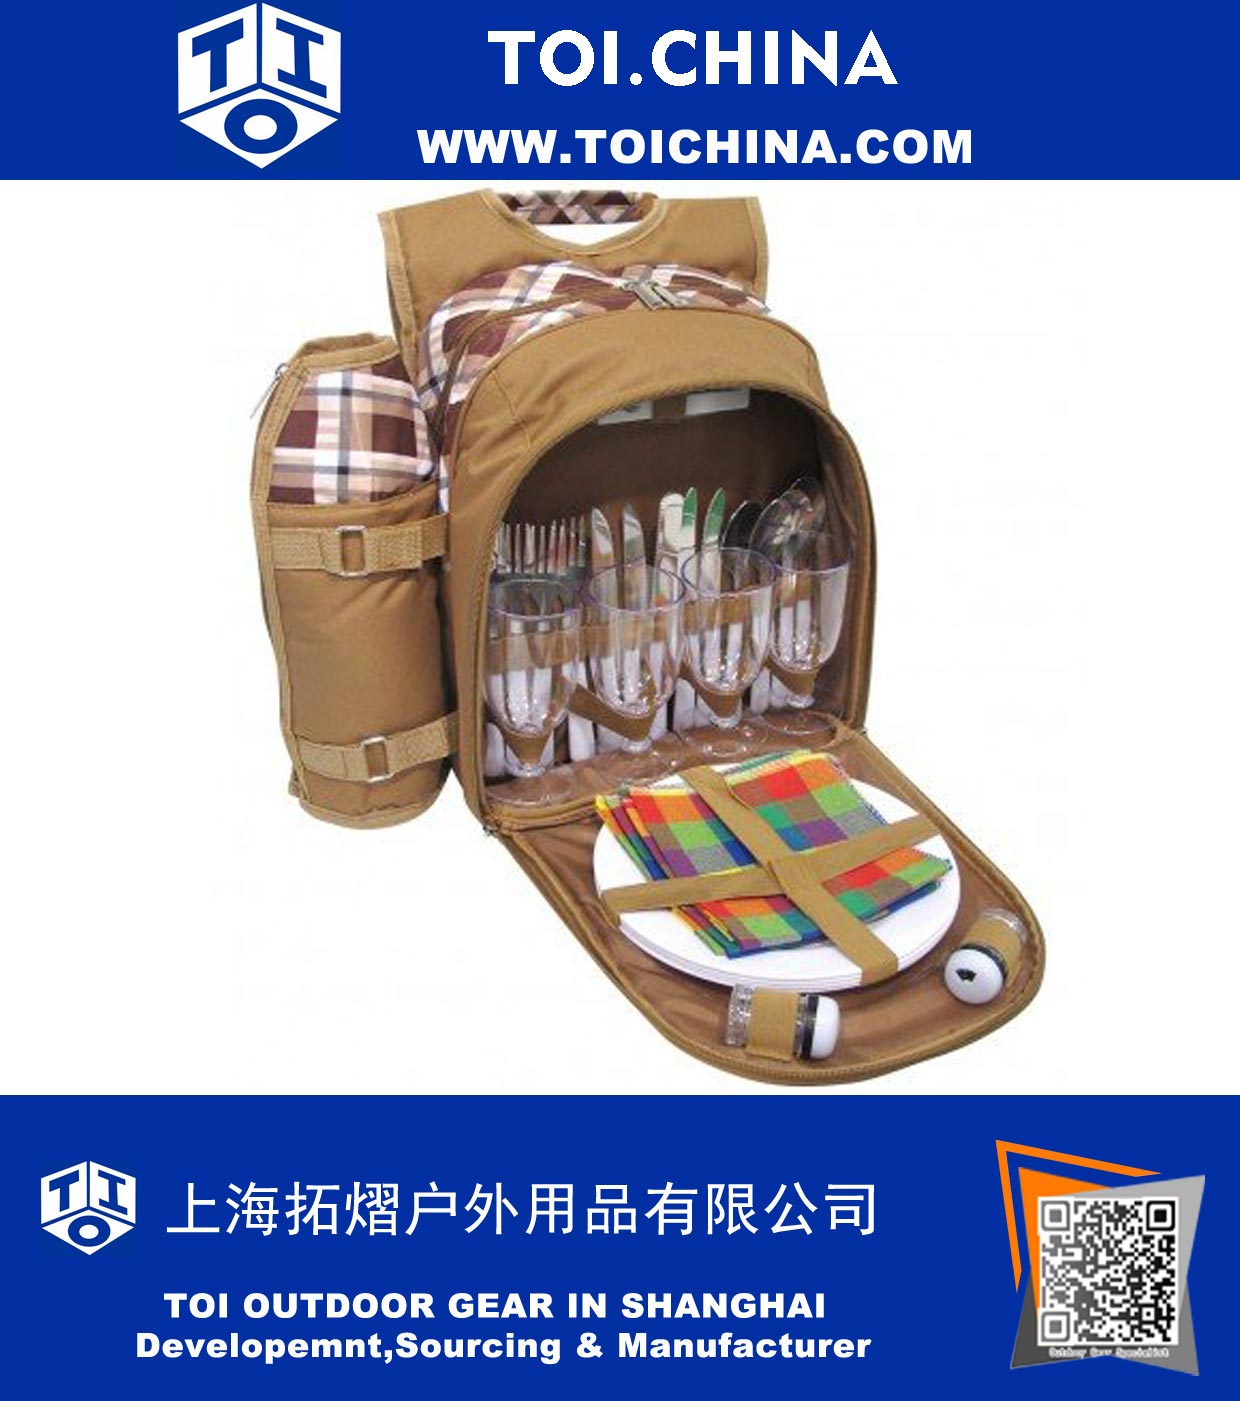 4 Person Set Picnic Backpack With Cooler Compartment, Detachable Bottle/Wine Holder, Platware and Plates